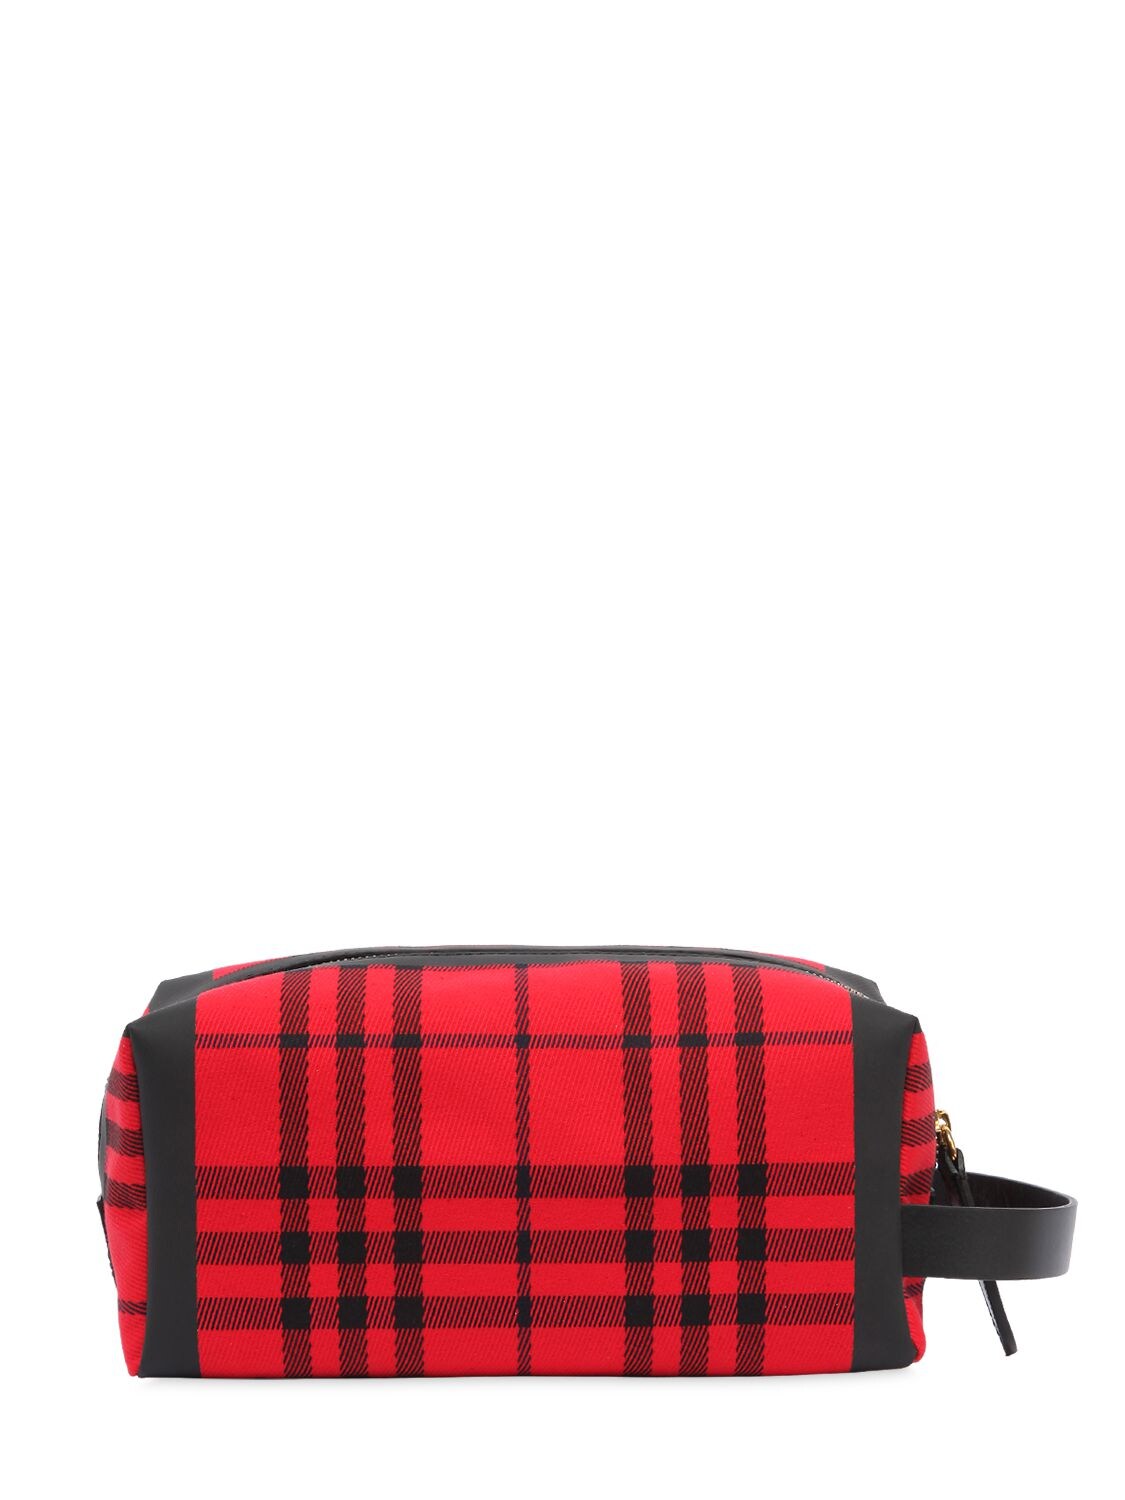 RUNWAY SS18 HERITAGE CHECK CANVAS CASE